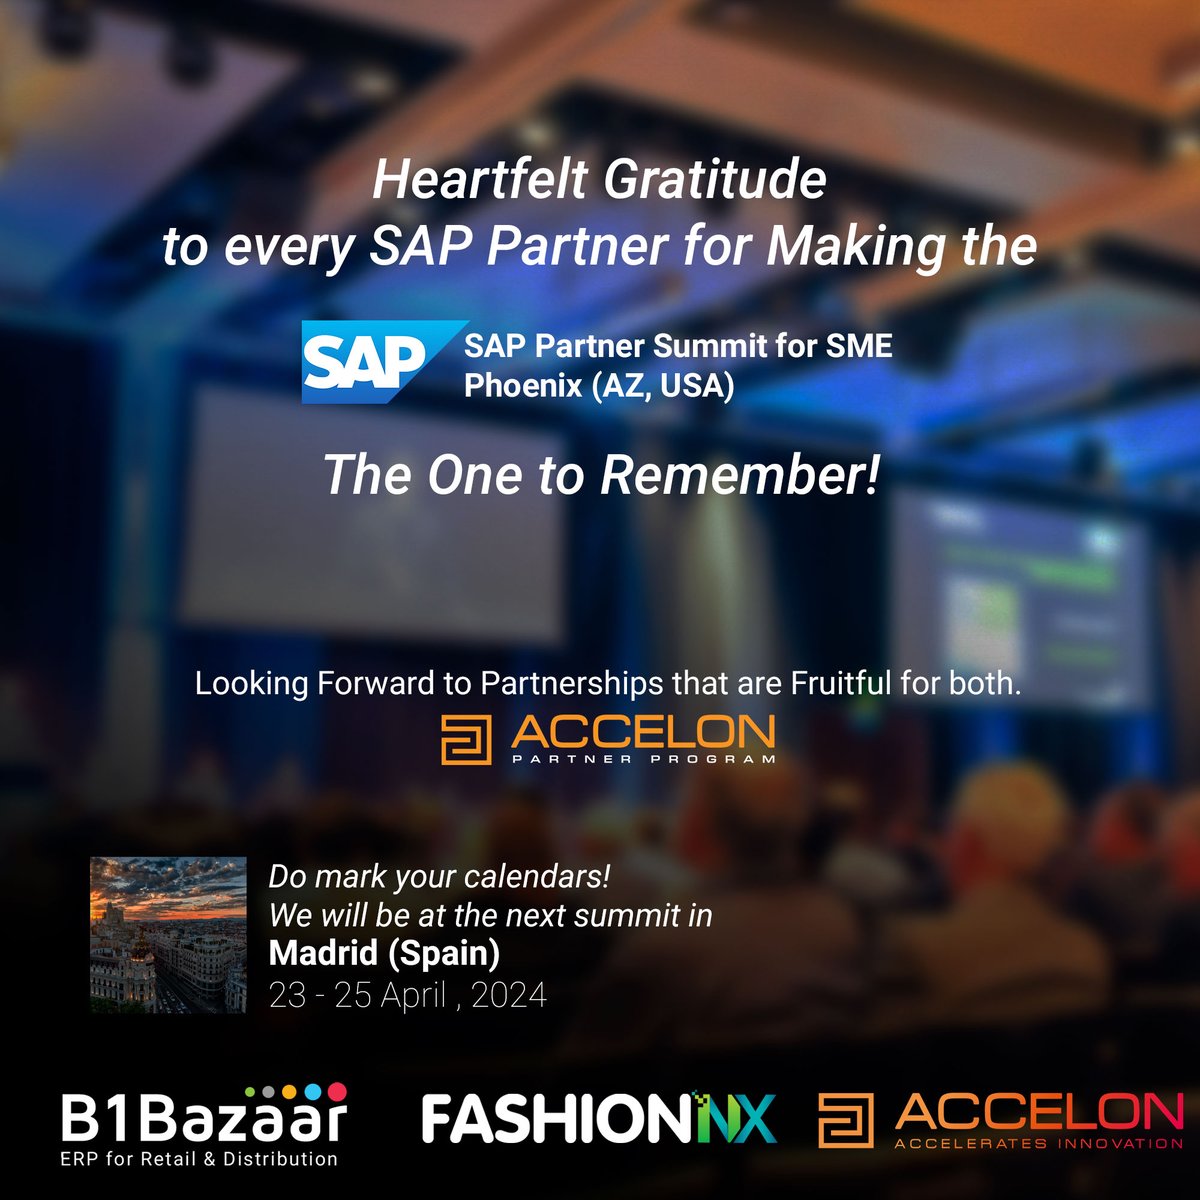 A Big Thank You to all the SAP Partners that attended the SAP Partner Summit for SME, Arizona

We look forward to forging wonderful partnerships and embarking on transformational journeys with you
#SAPPartnerSummit #SAP #ERP #PartnerSuccess #SAPCommunity #SAPB1 #SAPBusinessOne